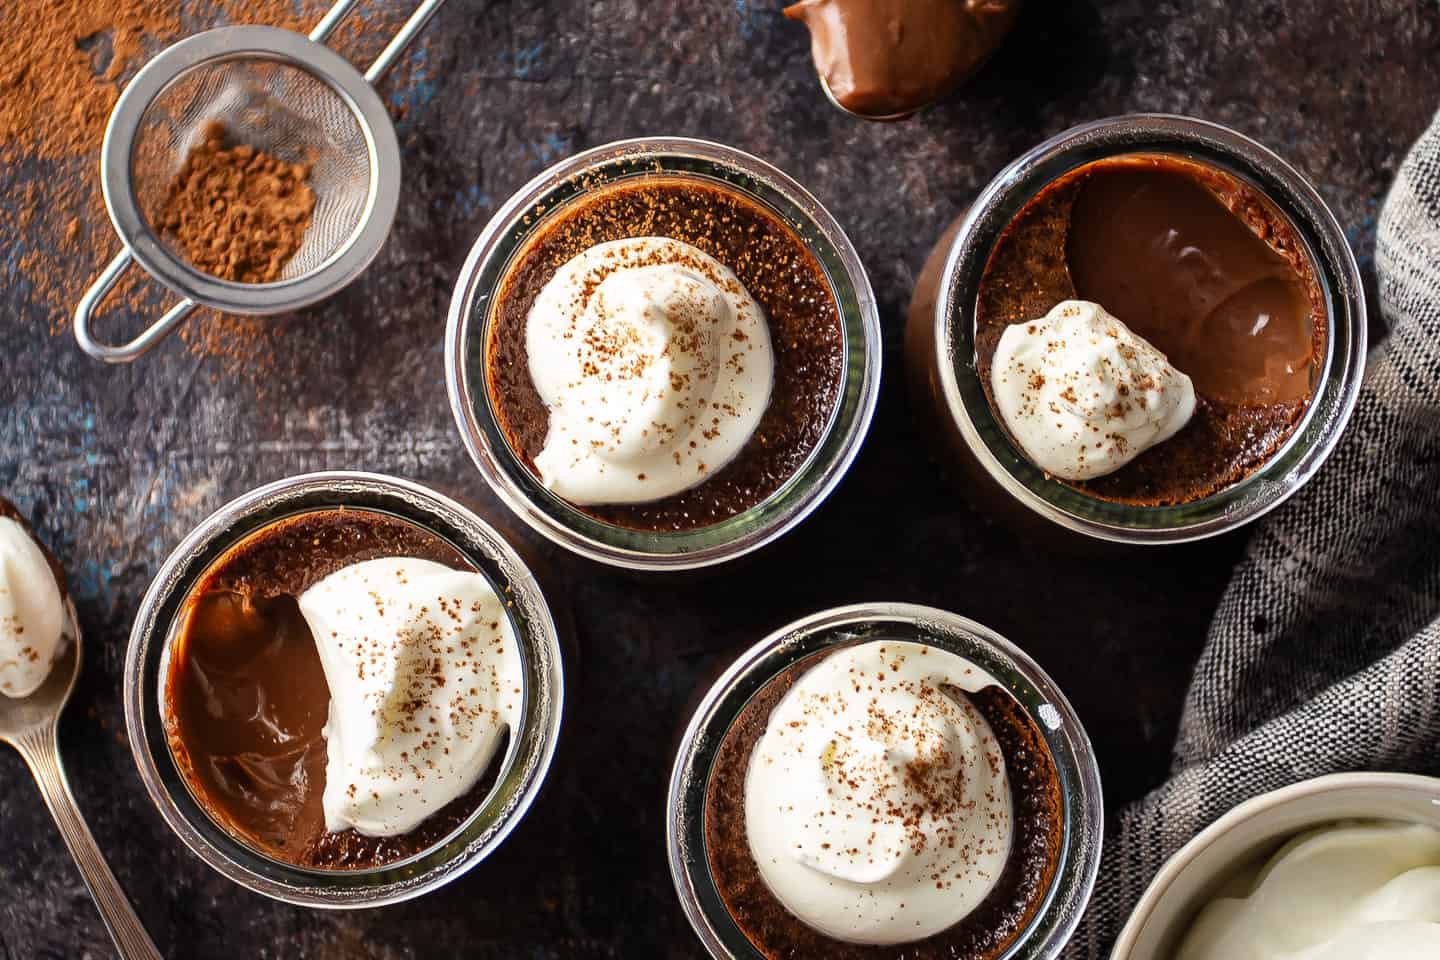 Pot de creme recipe, prepared in individual glass jars and dusted with cocoa powder.